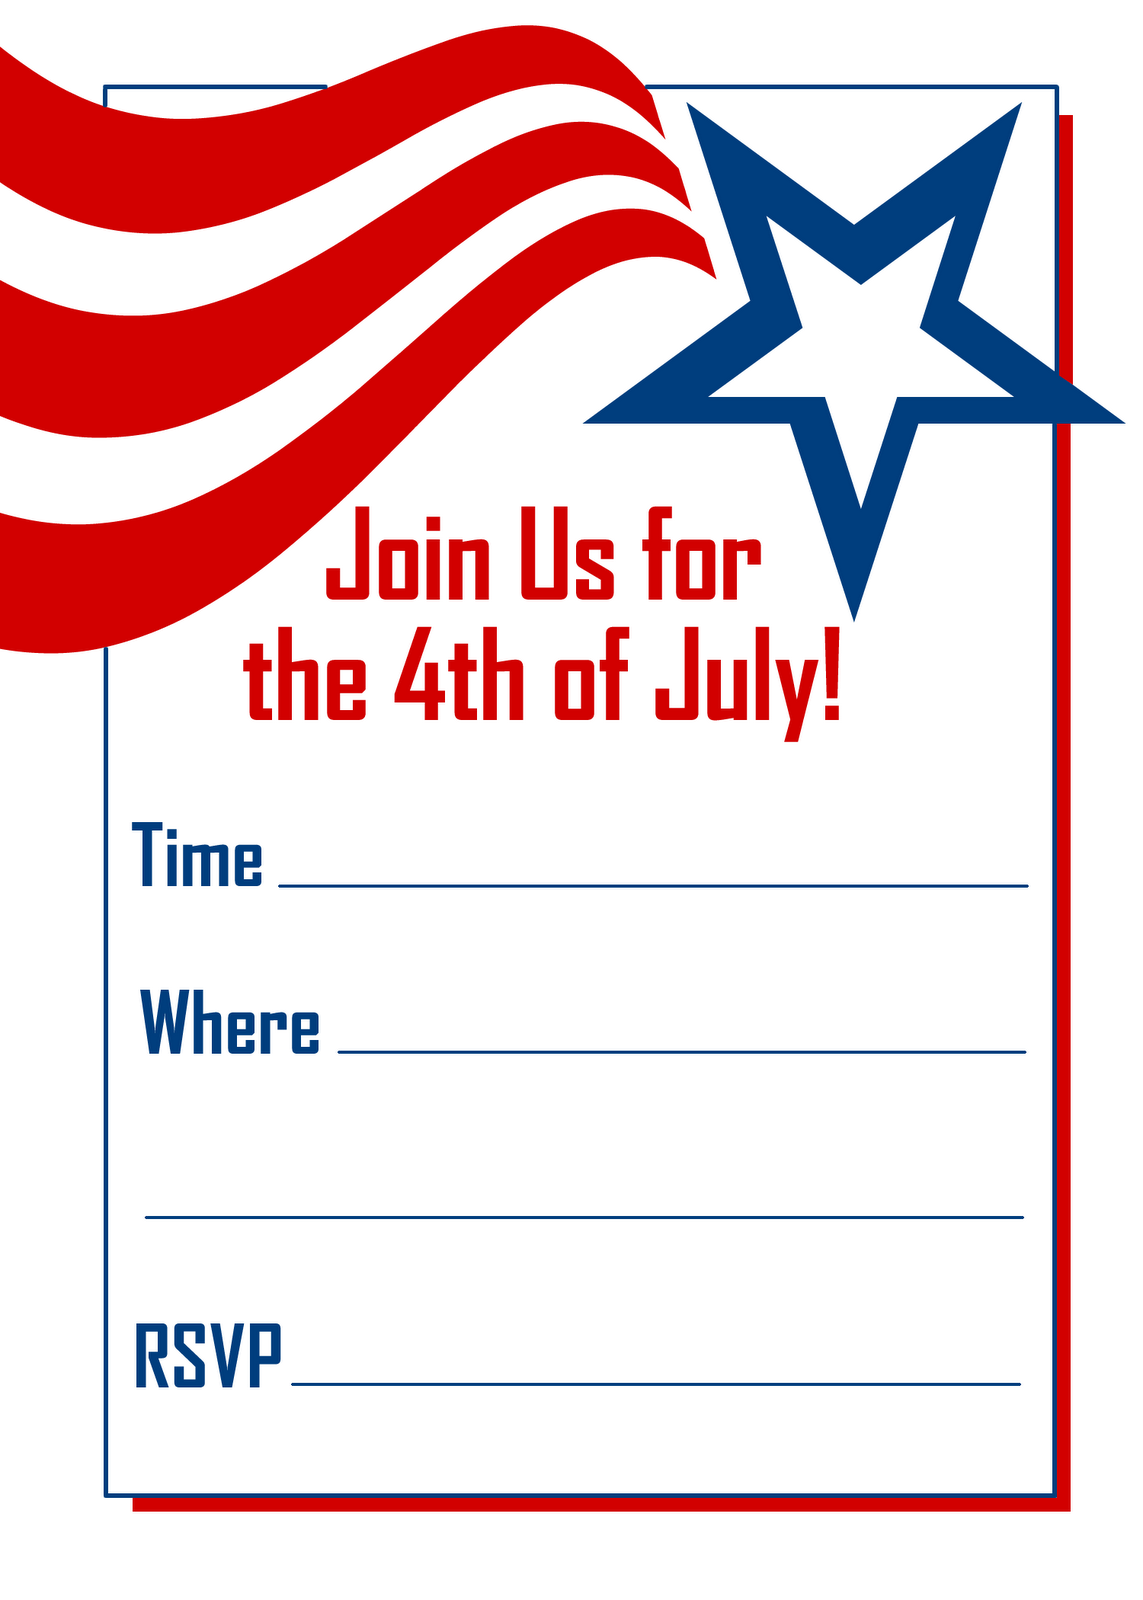 Free Printable Party Invitations: Red, White and Blue 4th of July ...